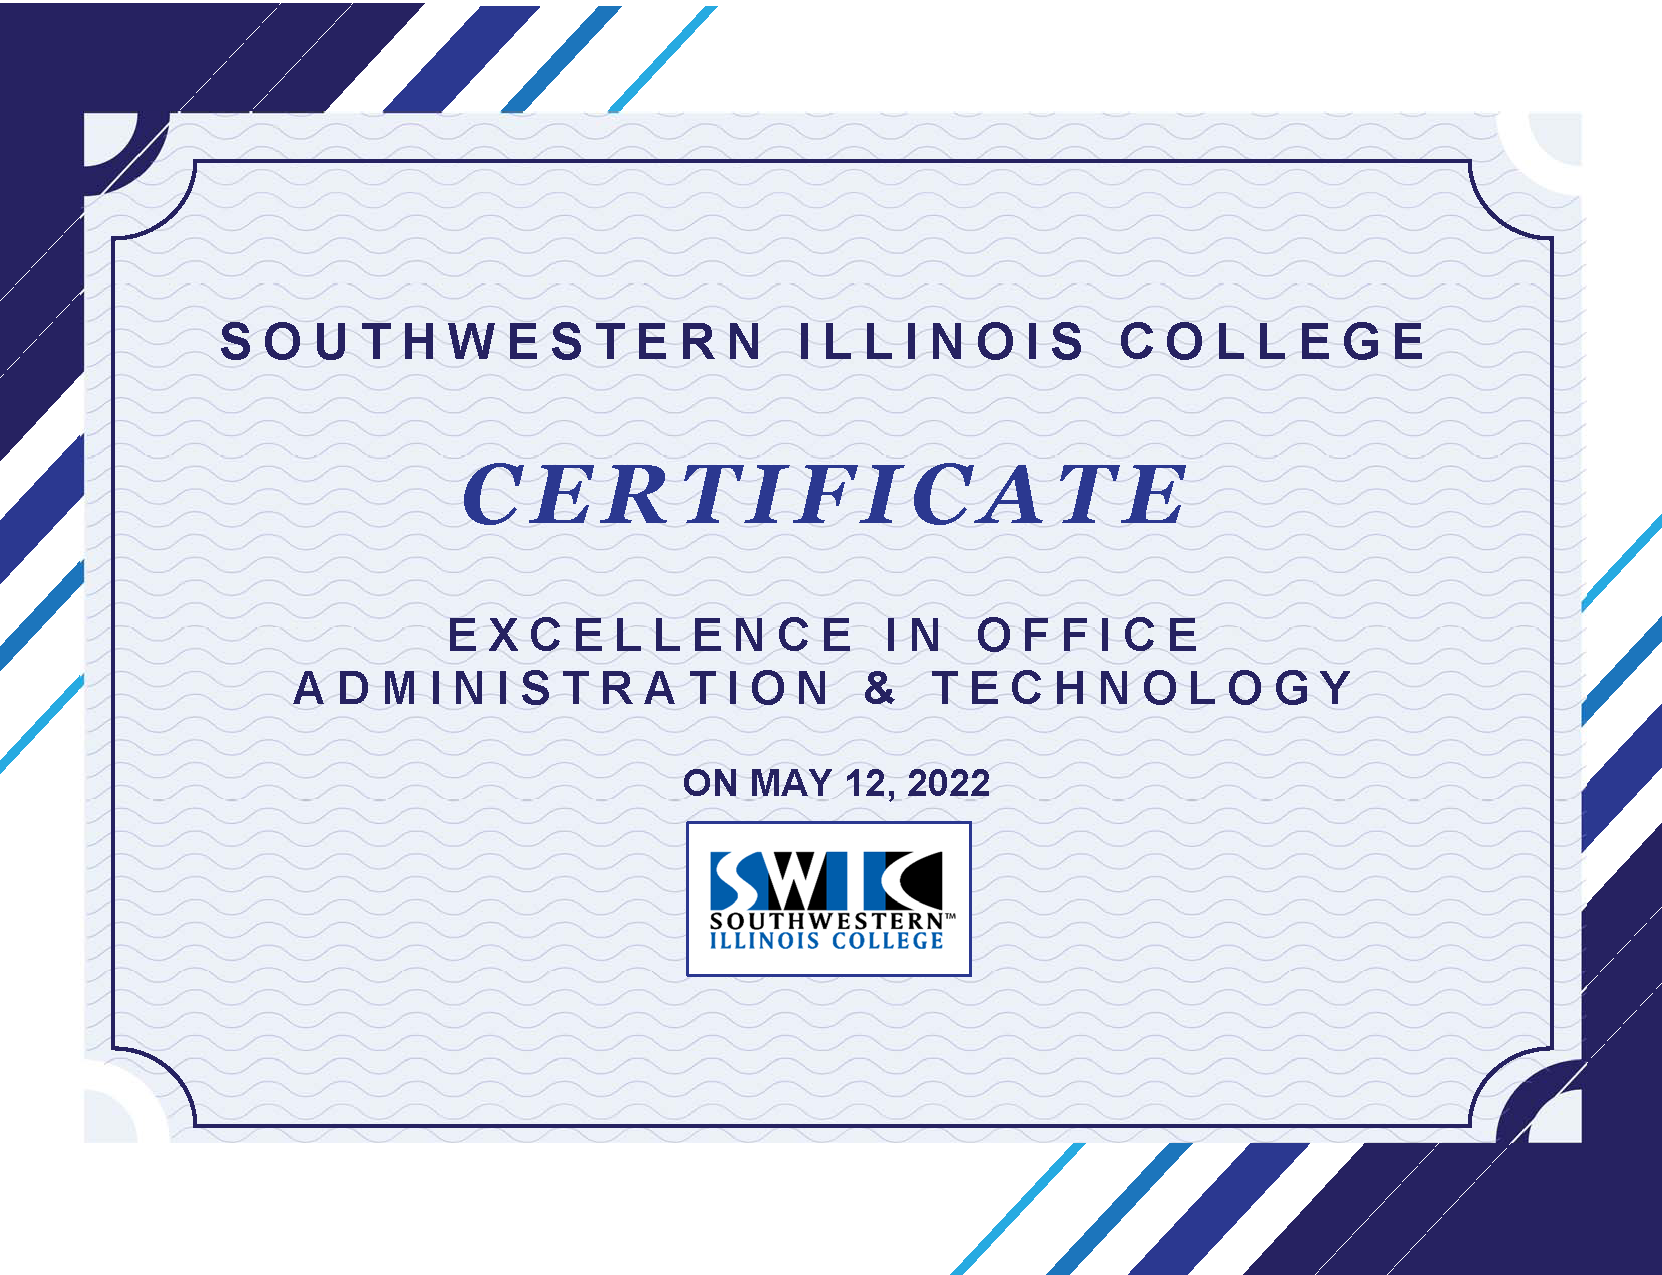 Southwestern Illinois College Certificate Excellence in Office Administration & Technology